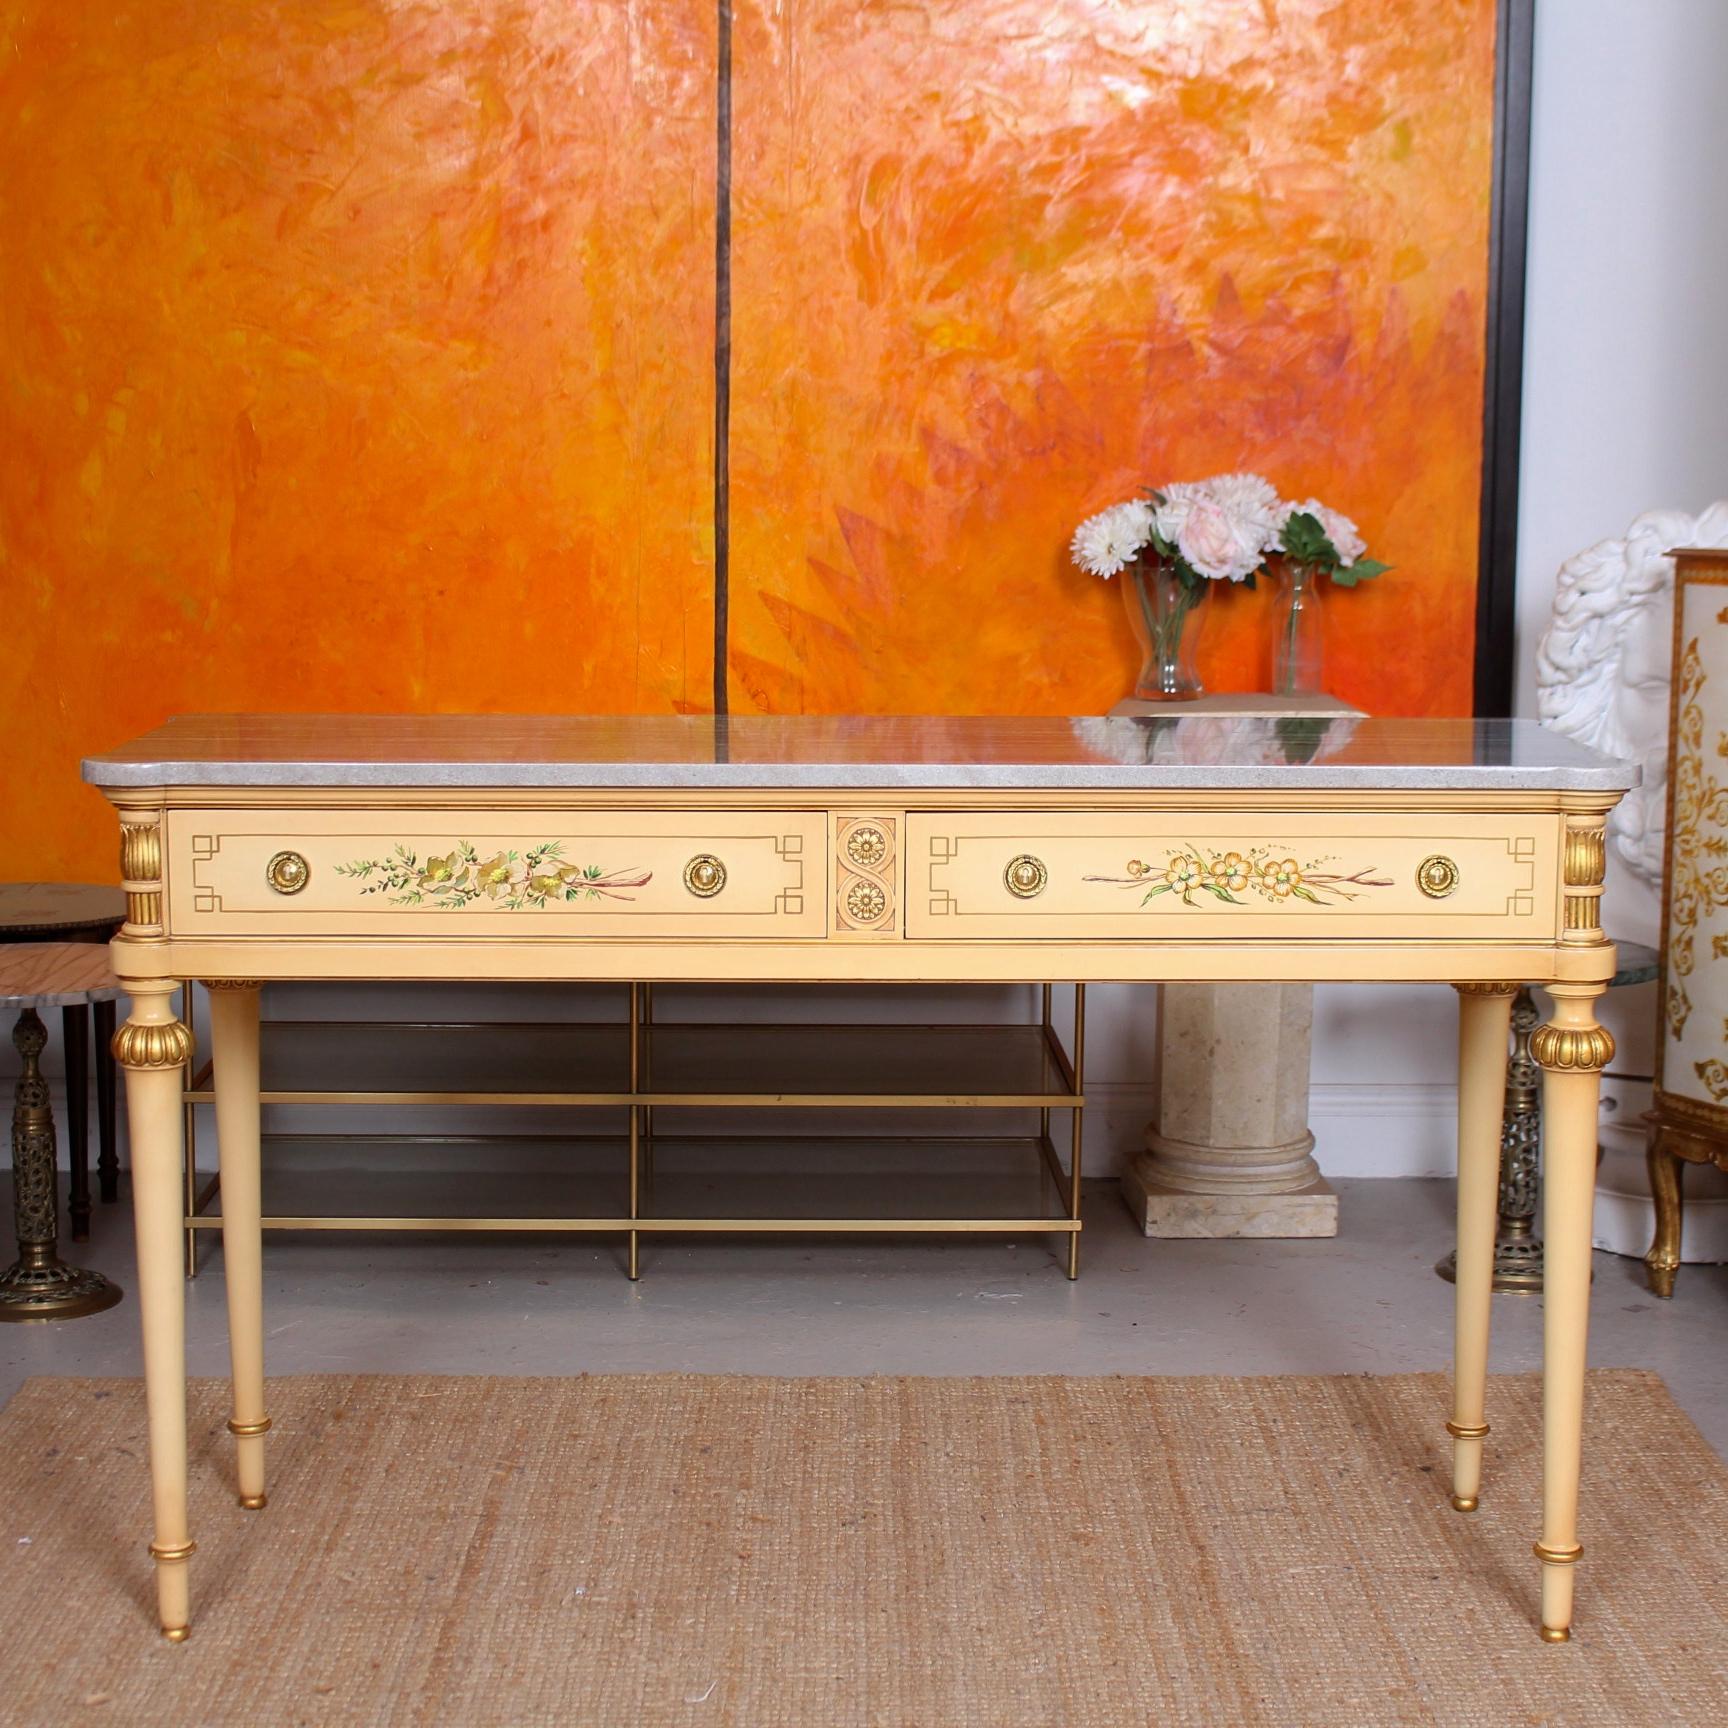 A fine quality hand painted marble topped Italian sideboard / console table originally retailed by Maple & Co.

The excellent grey marble top with rounded corners to match the shaped of the table with hand painted gilt borders, flowers. Raised on